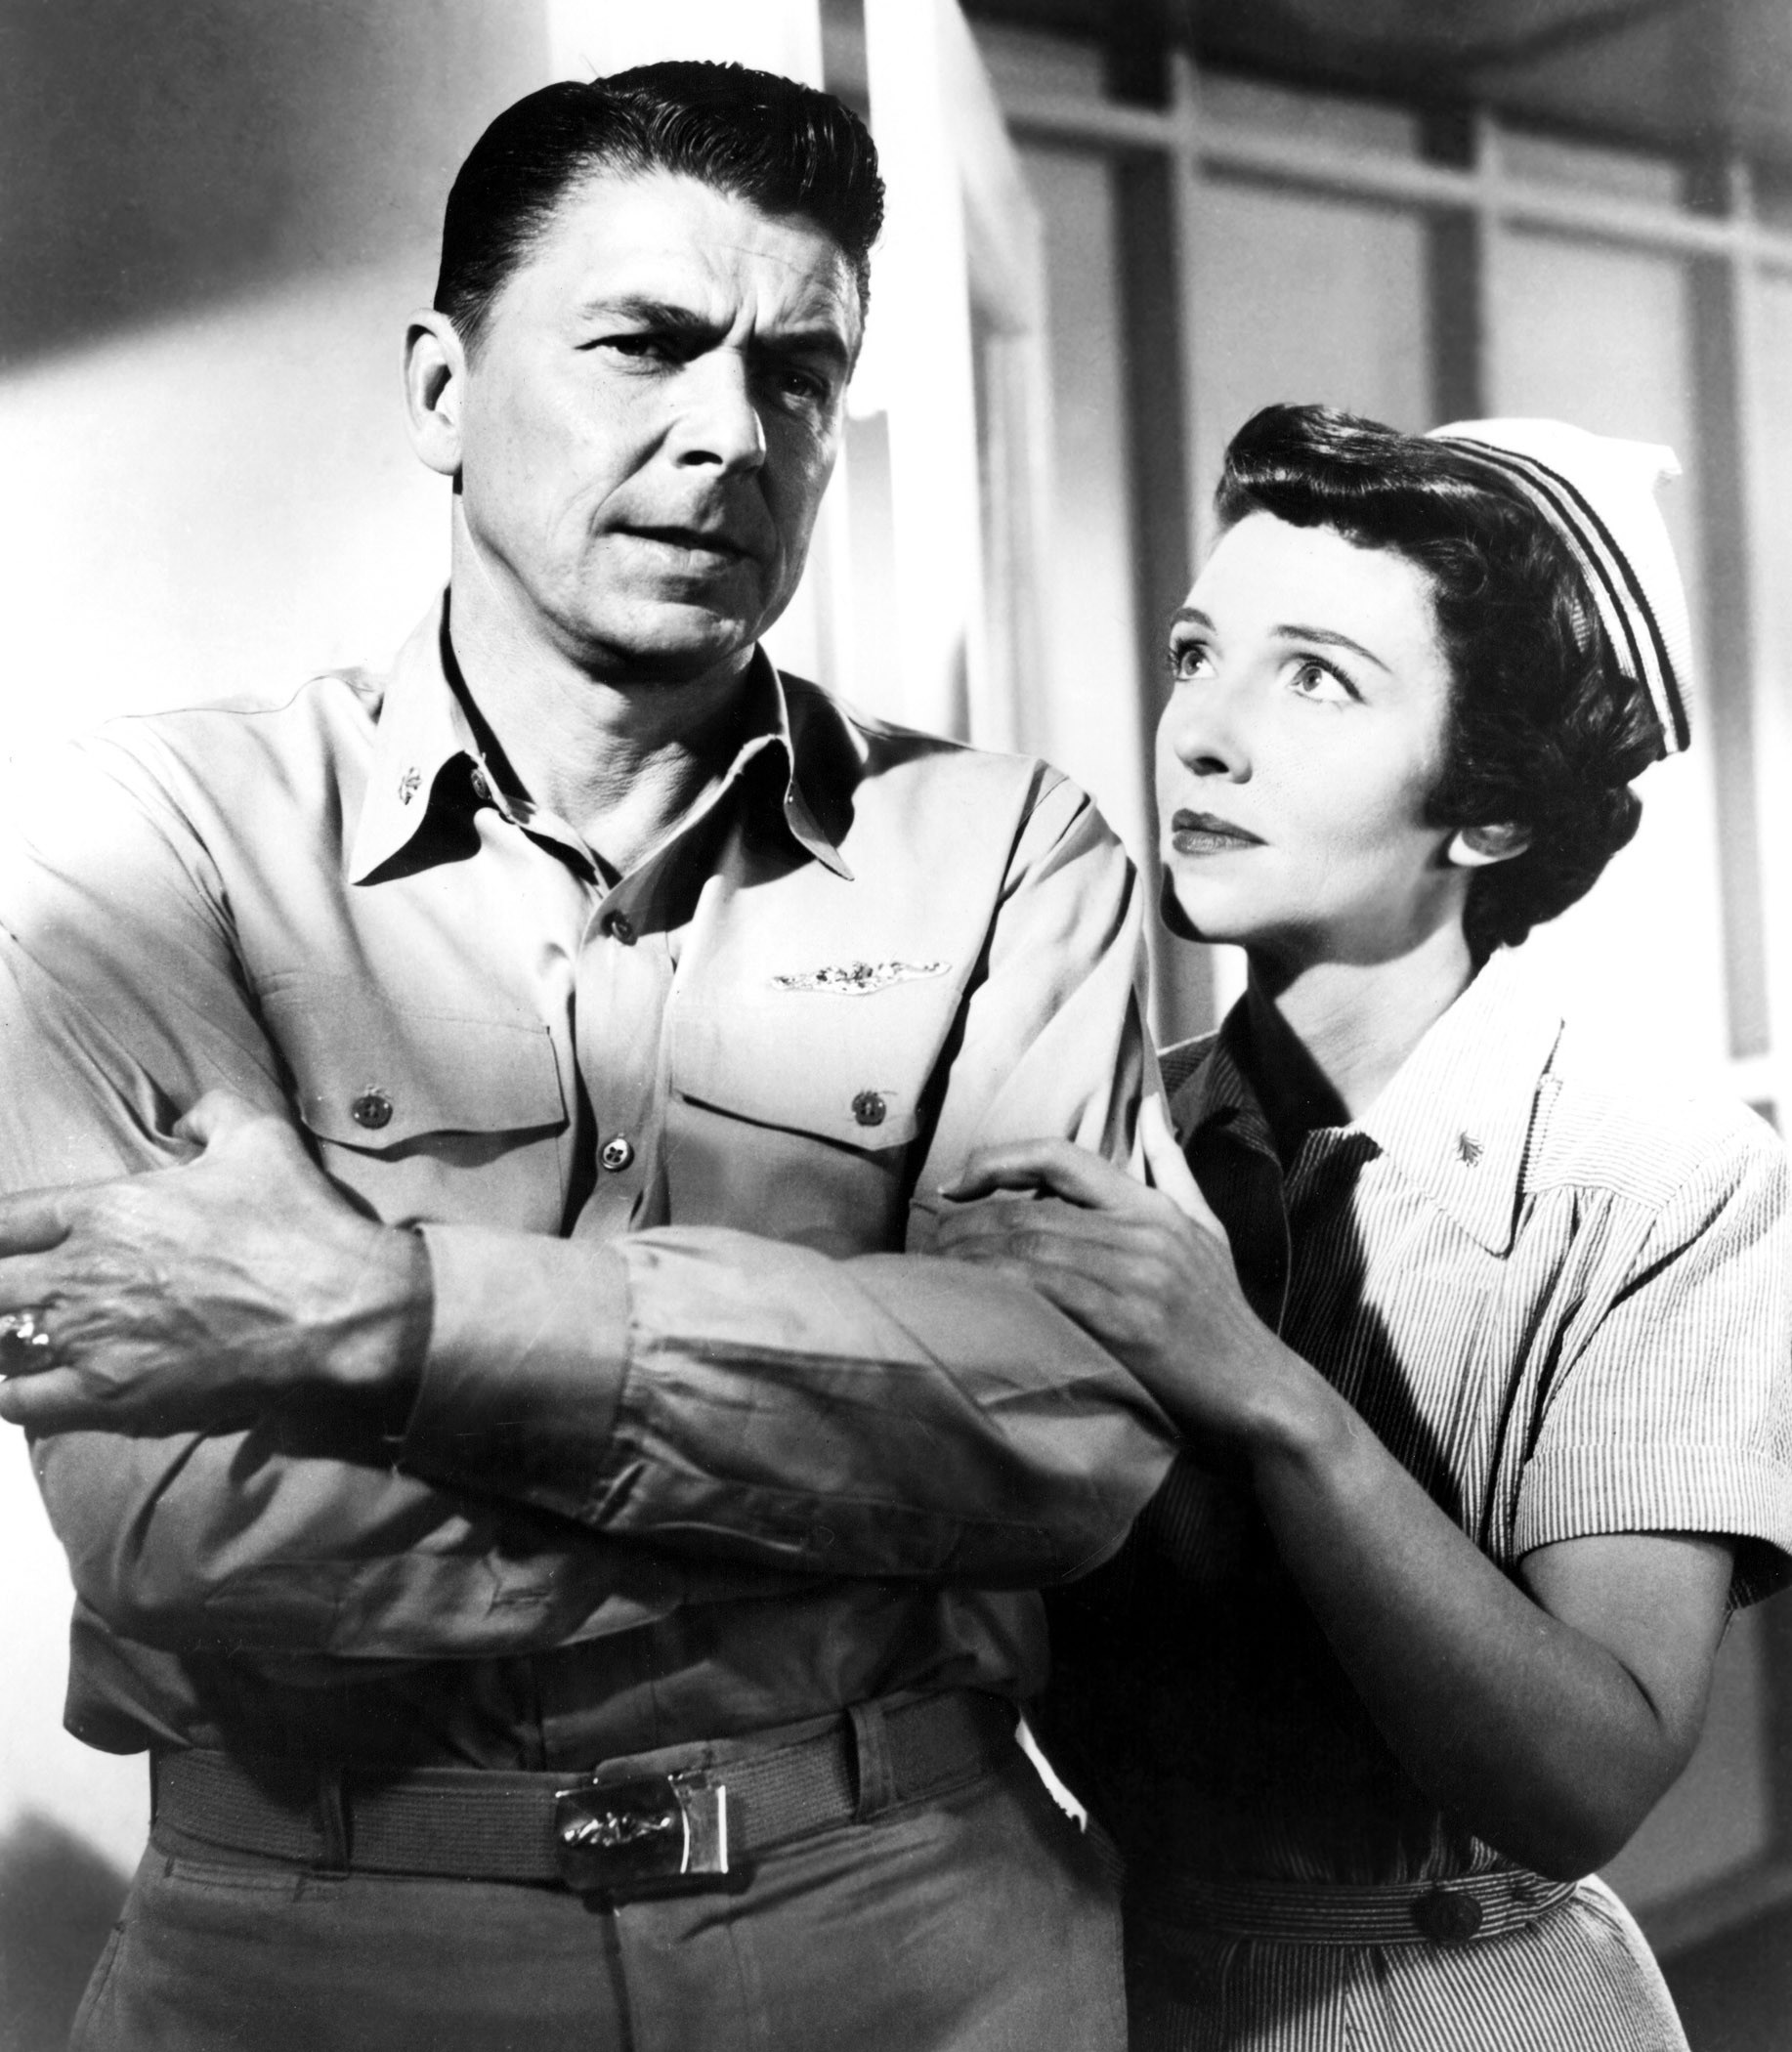 Co-Stars As a film actress, Nancy appeared in 11 films and generally received favorable reviews from critics, though not so much for her most widely mentioned performance, as a nurse engaged to Reagan's character in Hellcats of the Navy, above, the only film in which she and her future husband played together. By the time she was cast in the role, Ron and Nancy had already been married five years. After one more film role and a smattering of televison appearances, Nancy would leave acting for good. She later commented that she became an actress because she "didn't want to go back to Chicago and lead the life of a post-debutante. I wanted to do something until I found the man I wanted to marry."